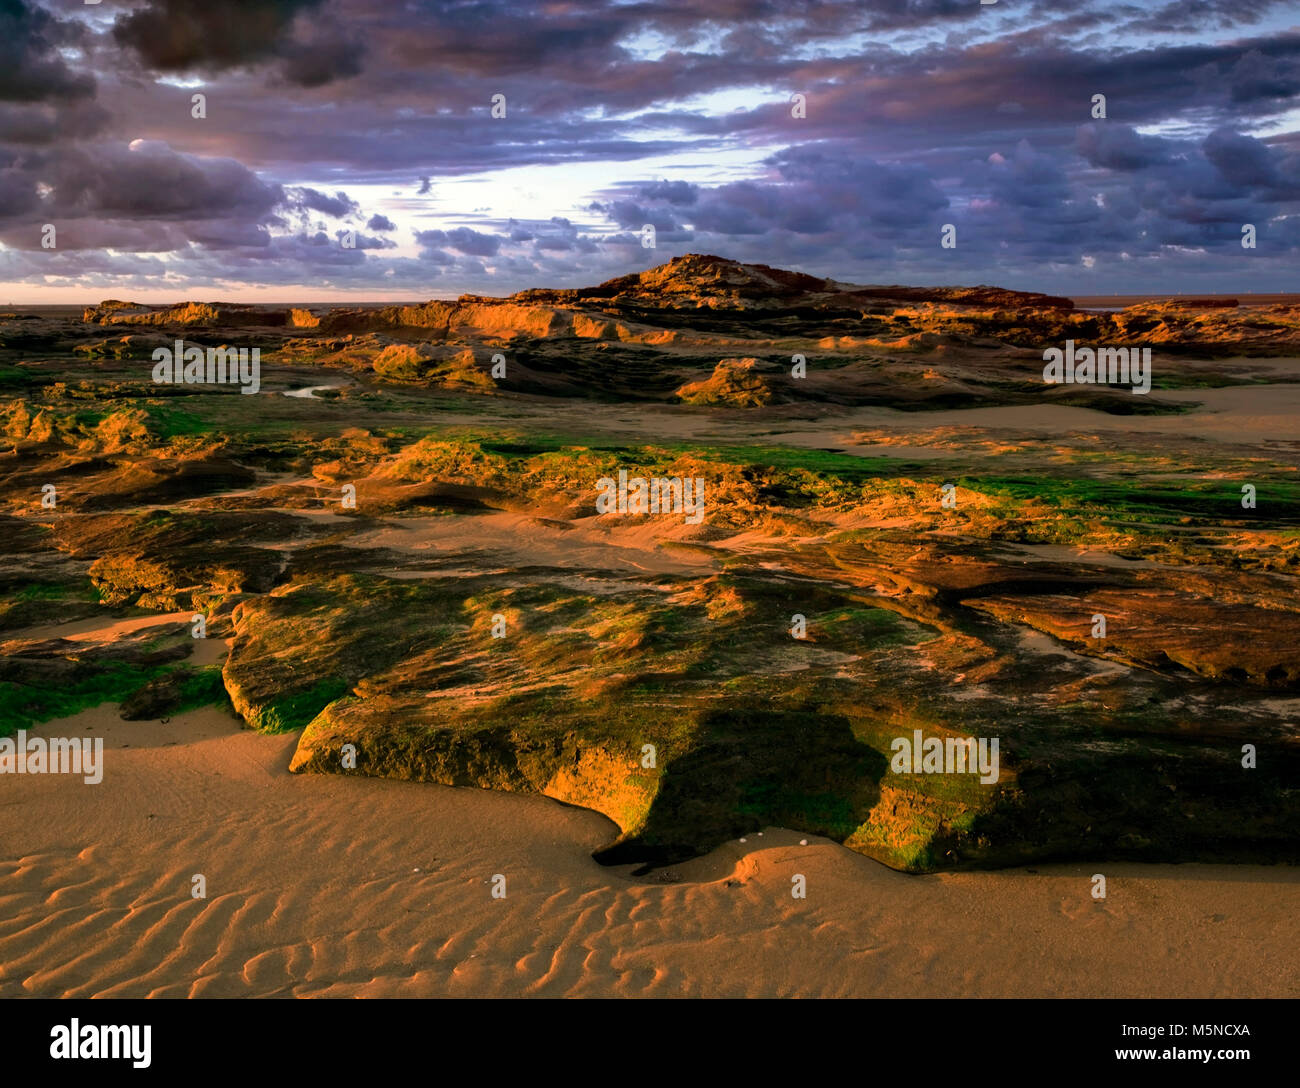 Sunset over the craggy Red Rocks of Hoylake Beach, Wirral, England. Stock Photo